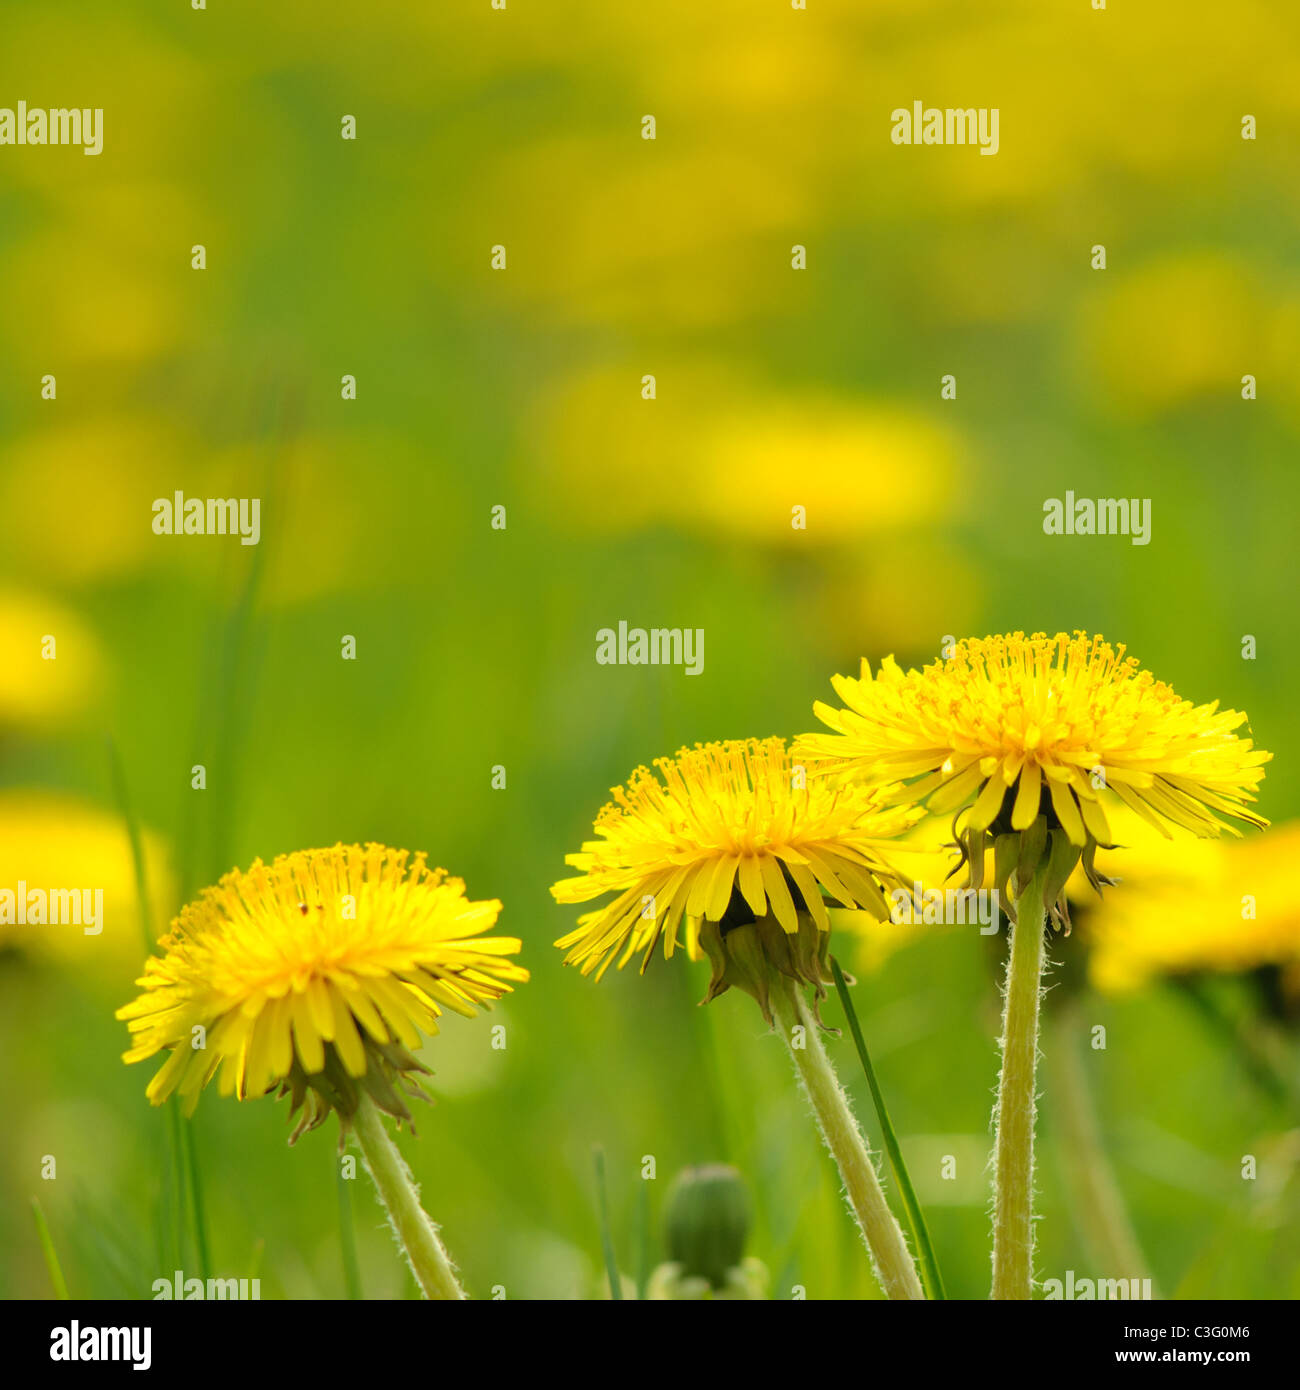 A few dandelions in a square frame Stock Photo